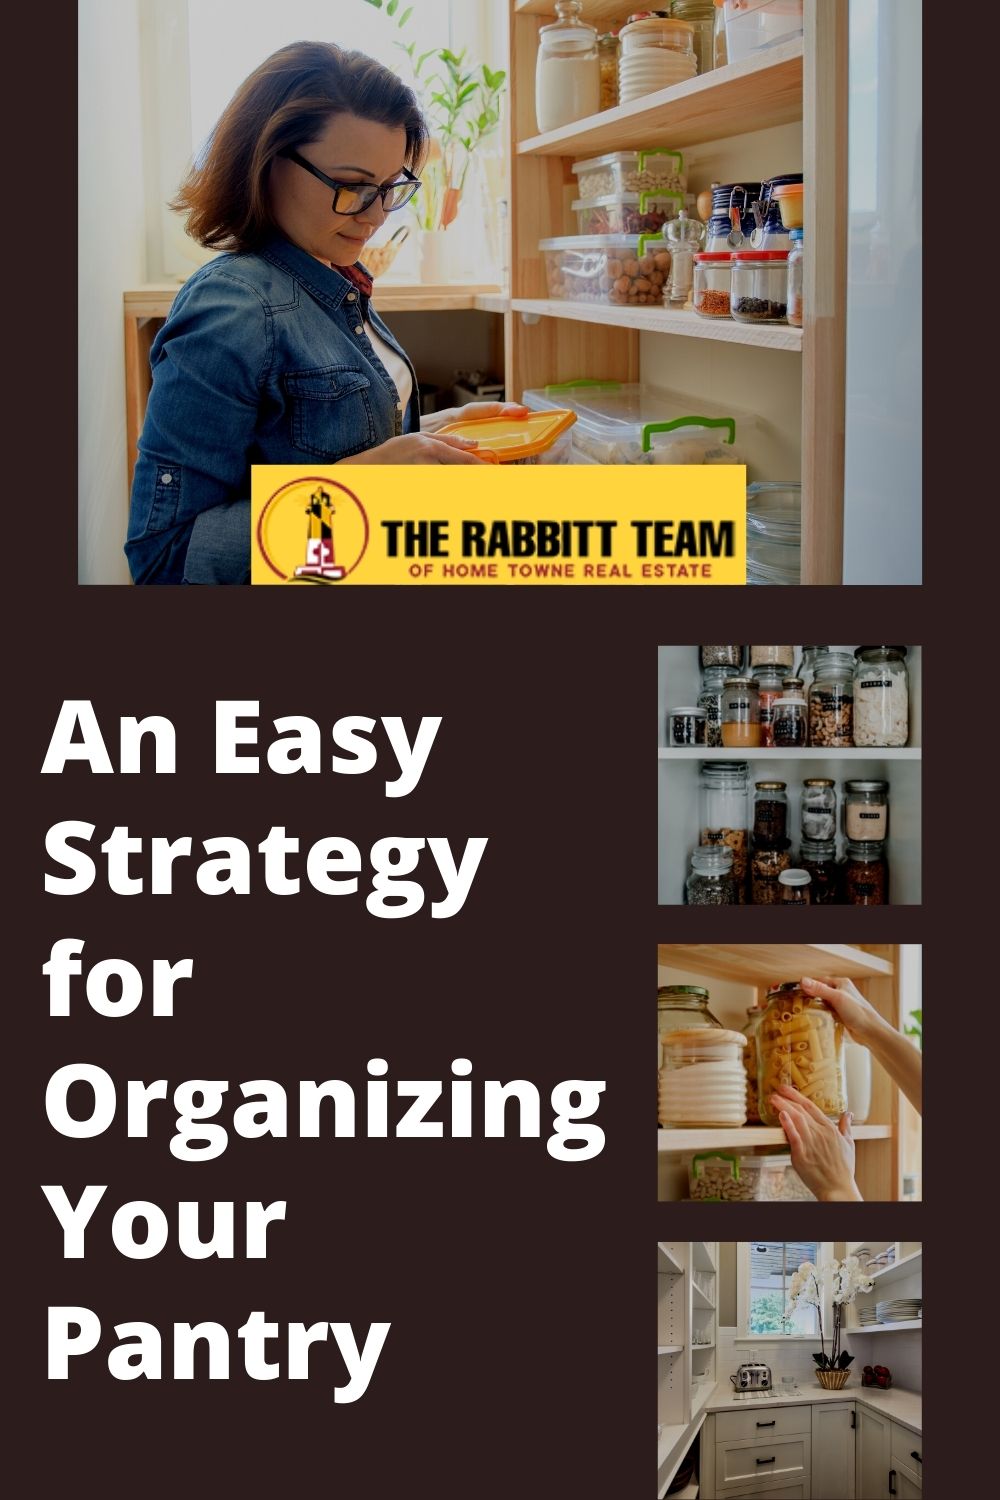 An Easy Strategy for Organizing Your Pantry